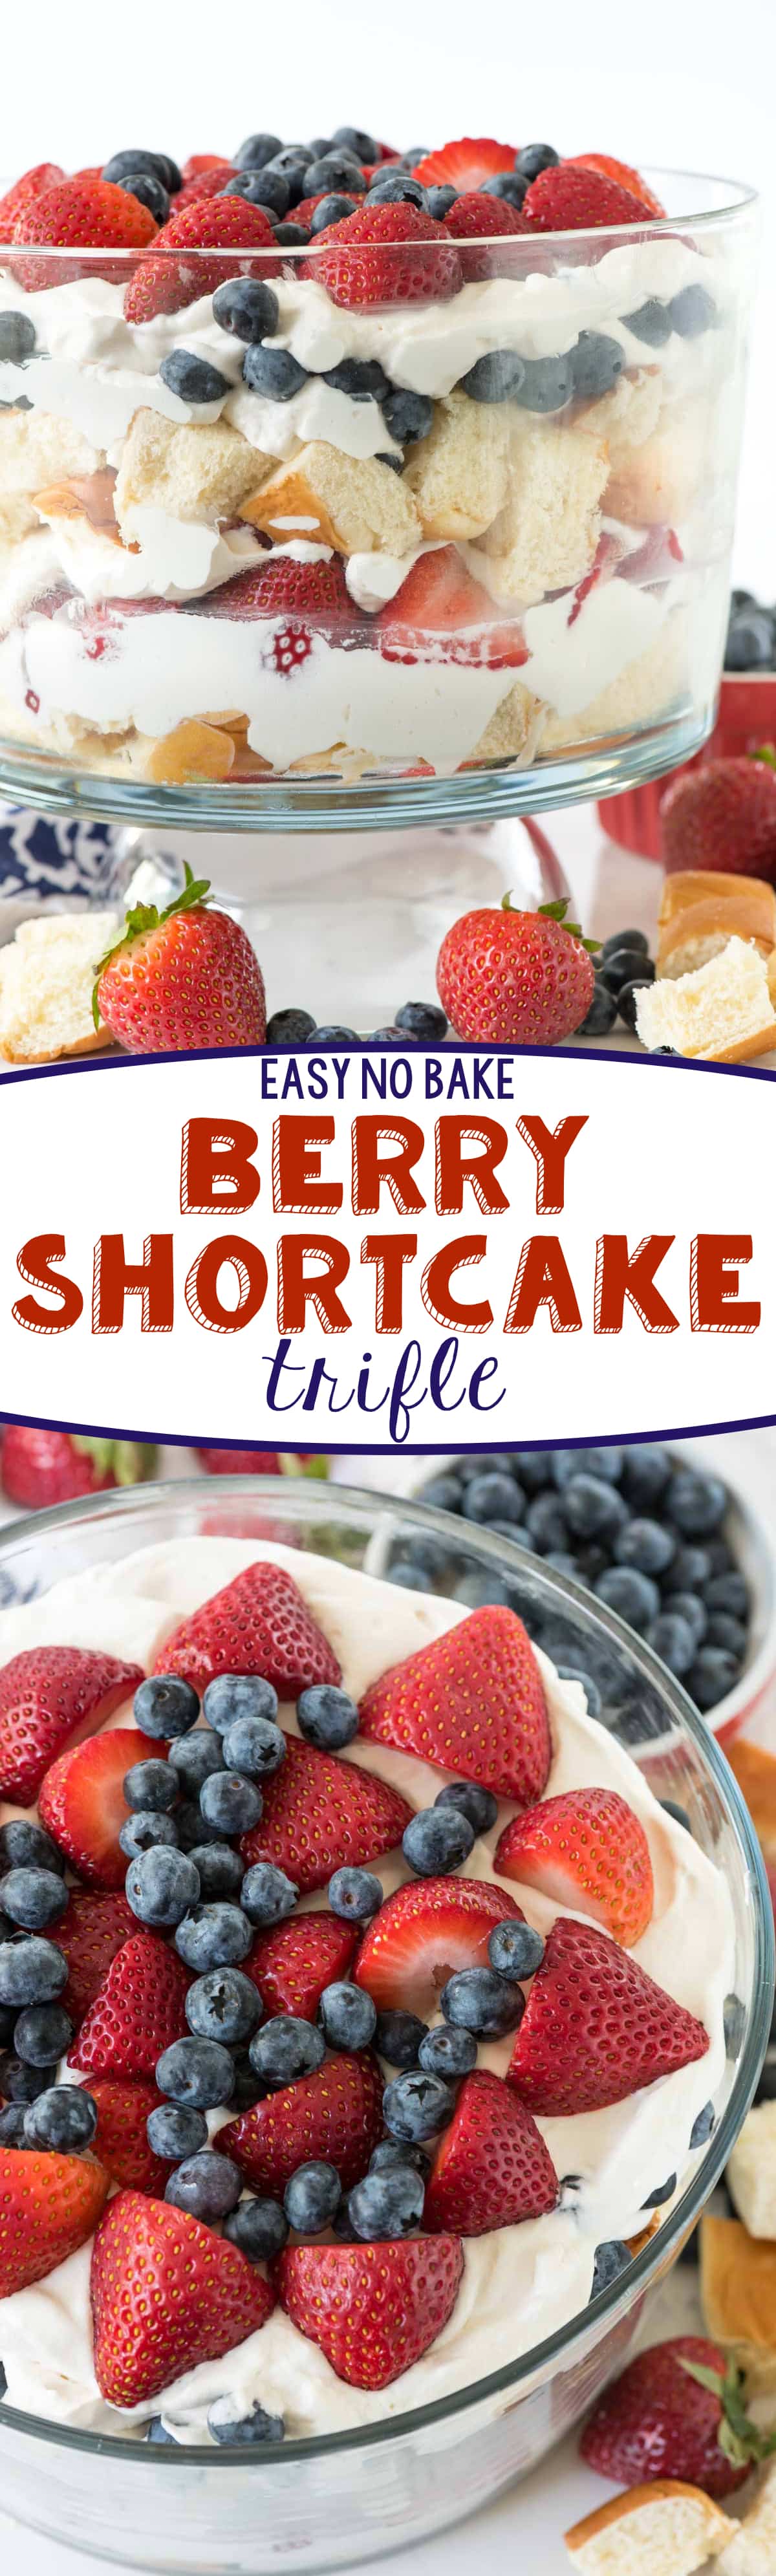 No Bake Berry Shortcake Trifle - this shortcake recipe is SO easy!! It's perfect for any summer party.